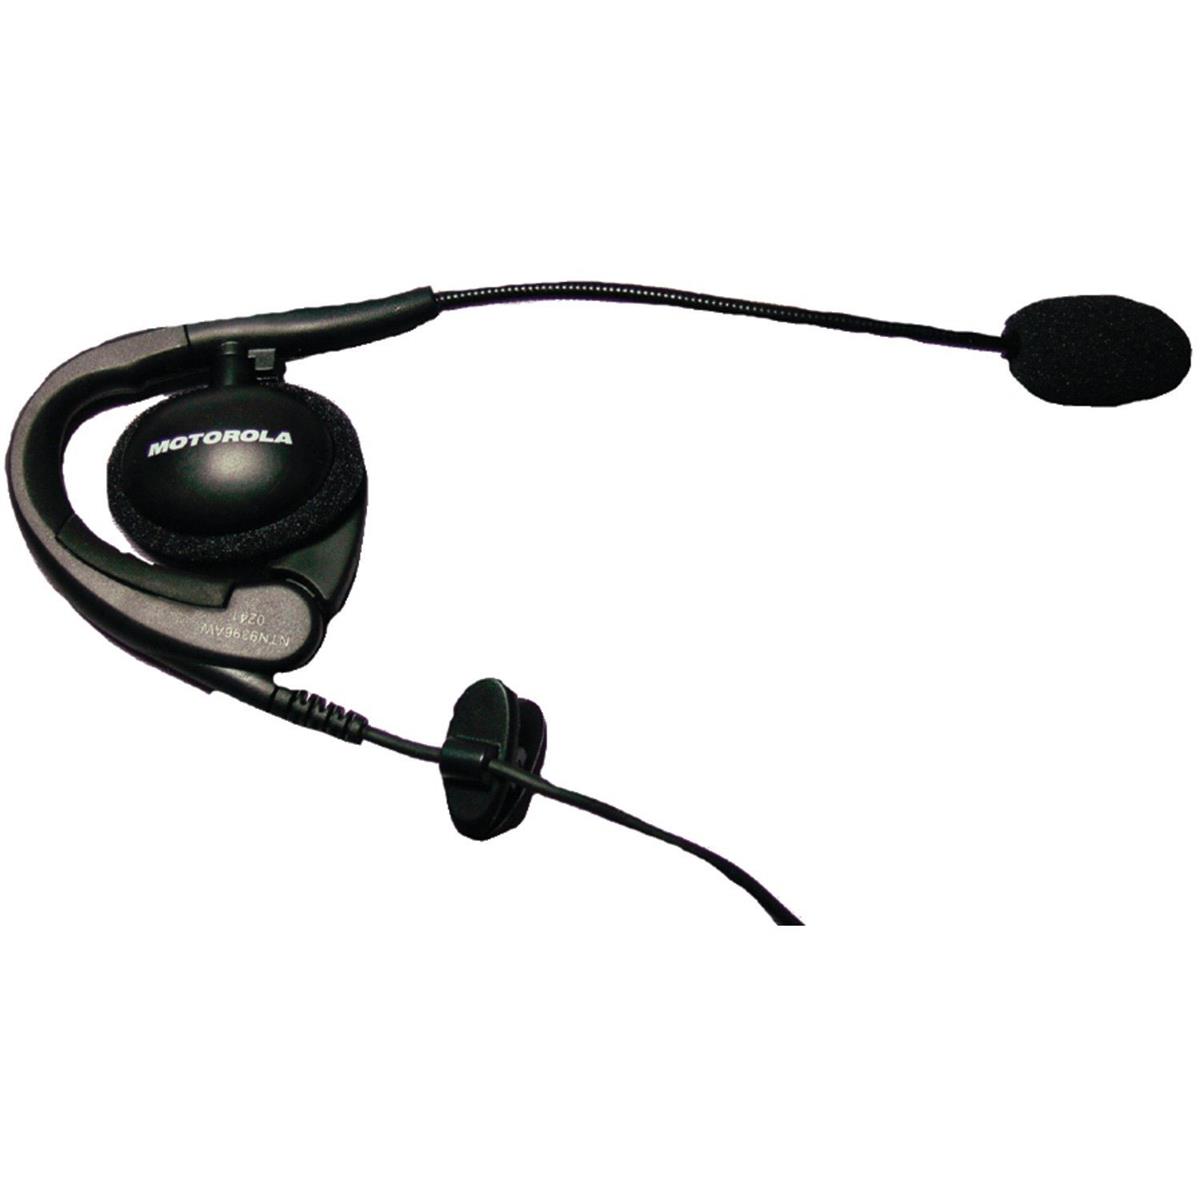 Image of Motorola 56320 Earpiece with Boom Microphone for GT